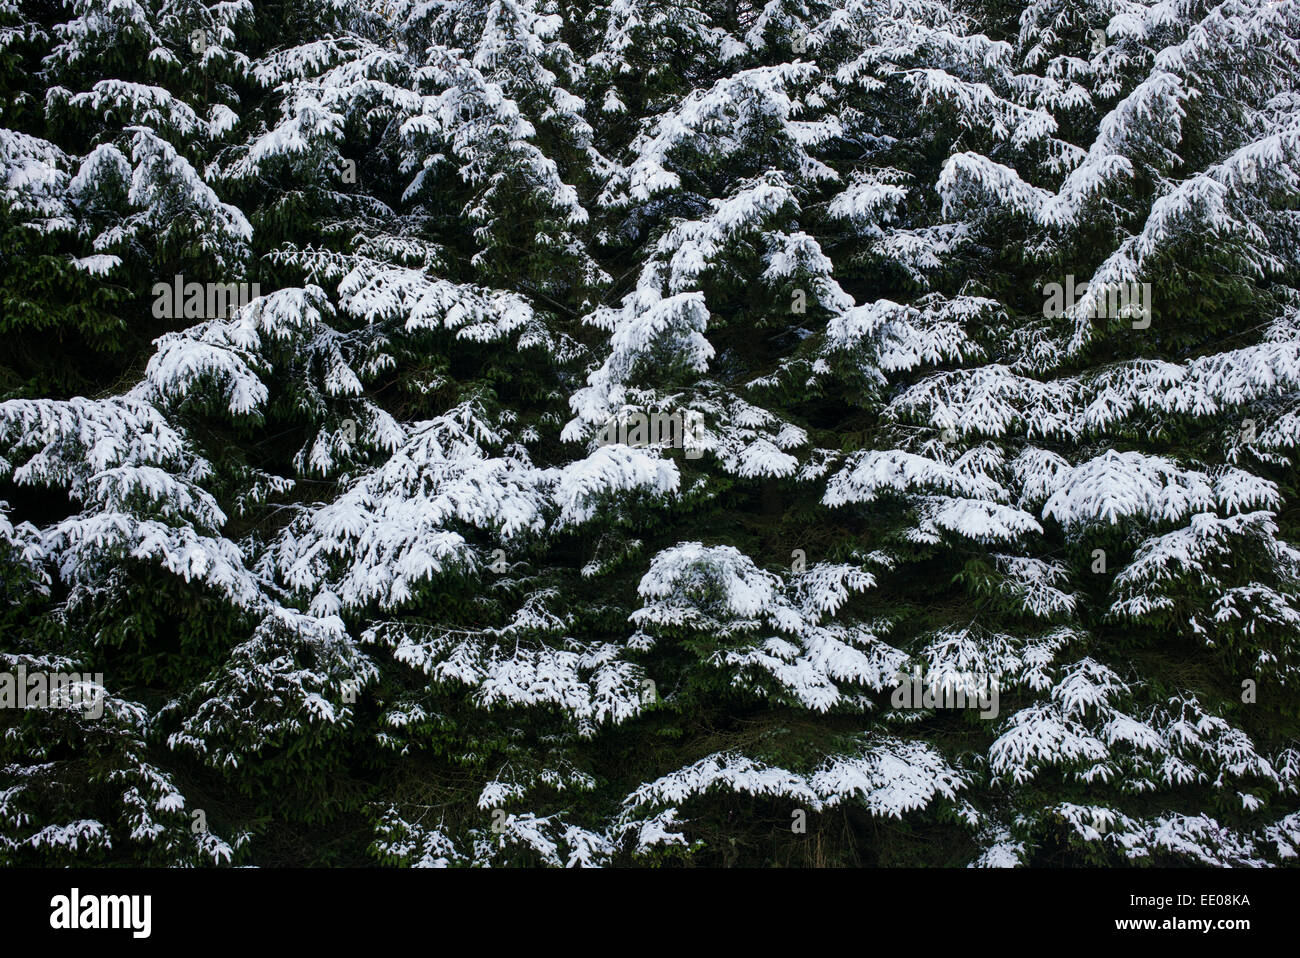 Snow covered pine trees in Scotland Stock Photo